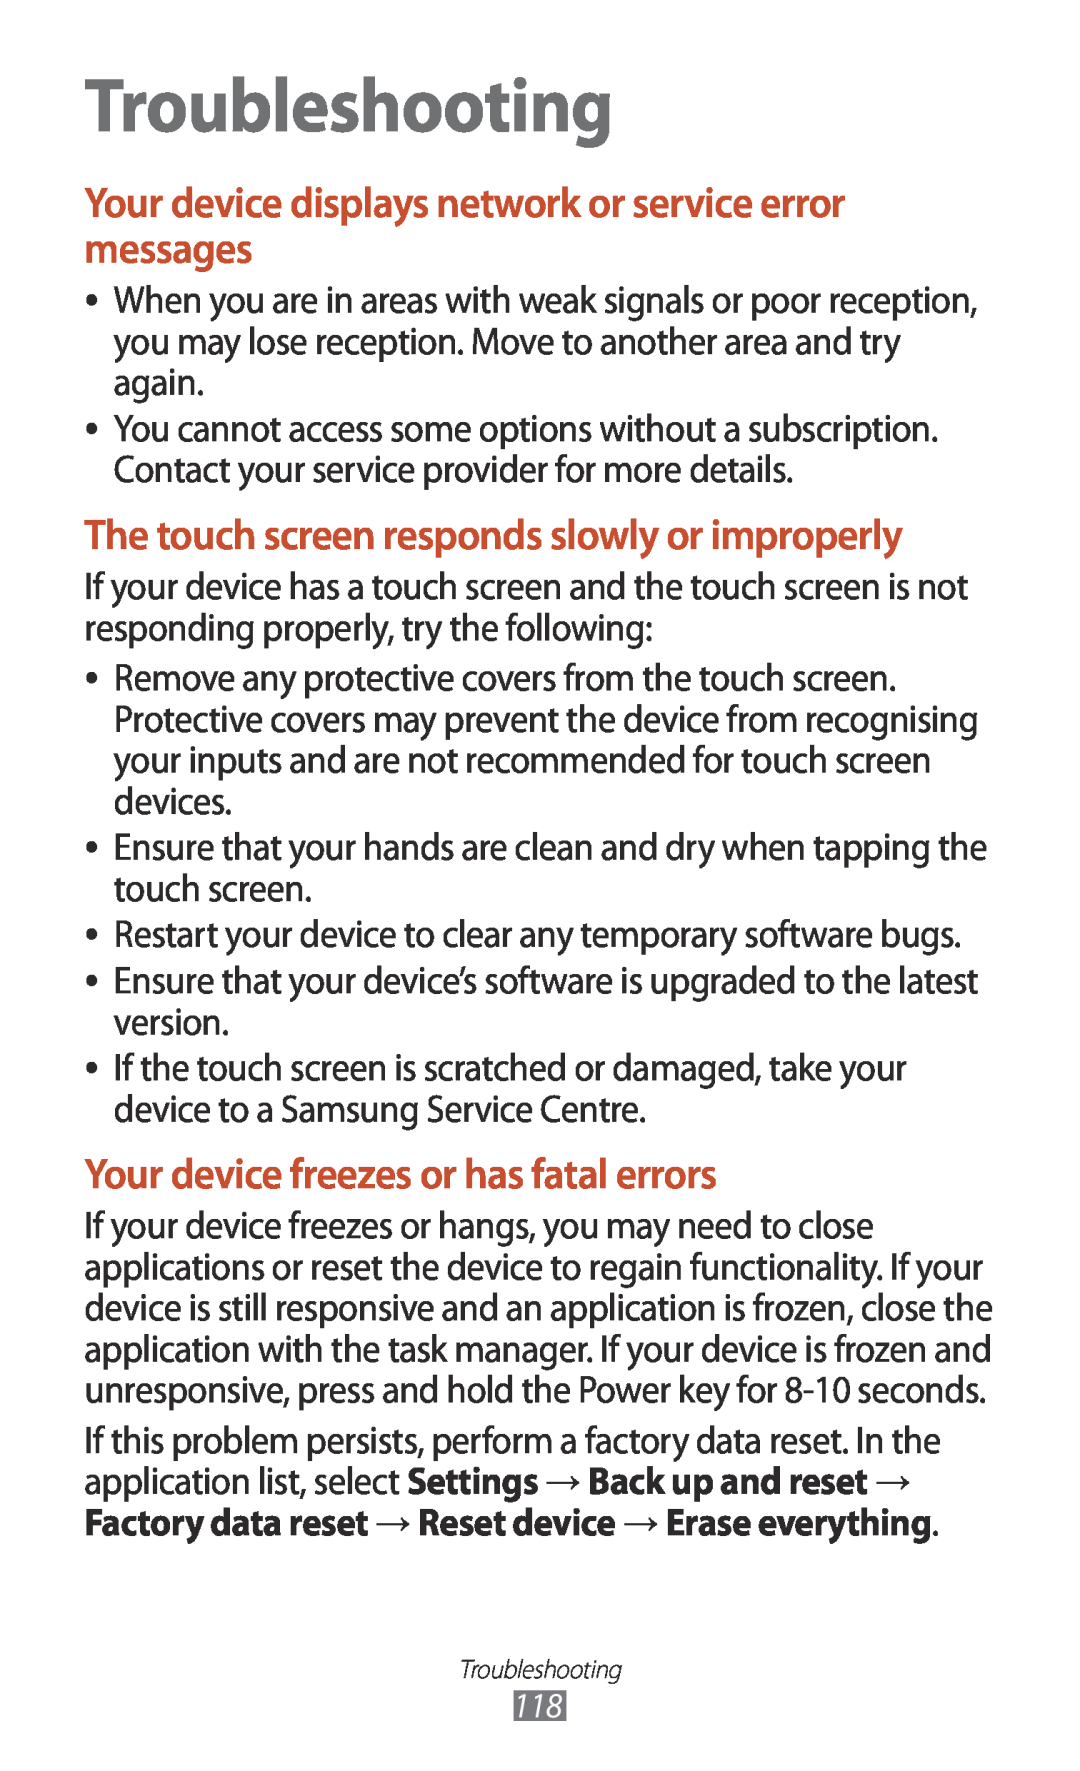 Samsung GTP5110ZWMTTT manual Troubleshooting, Your device displays network or service error messages 